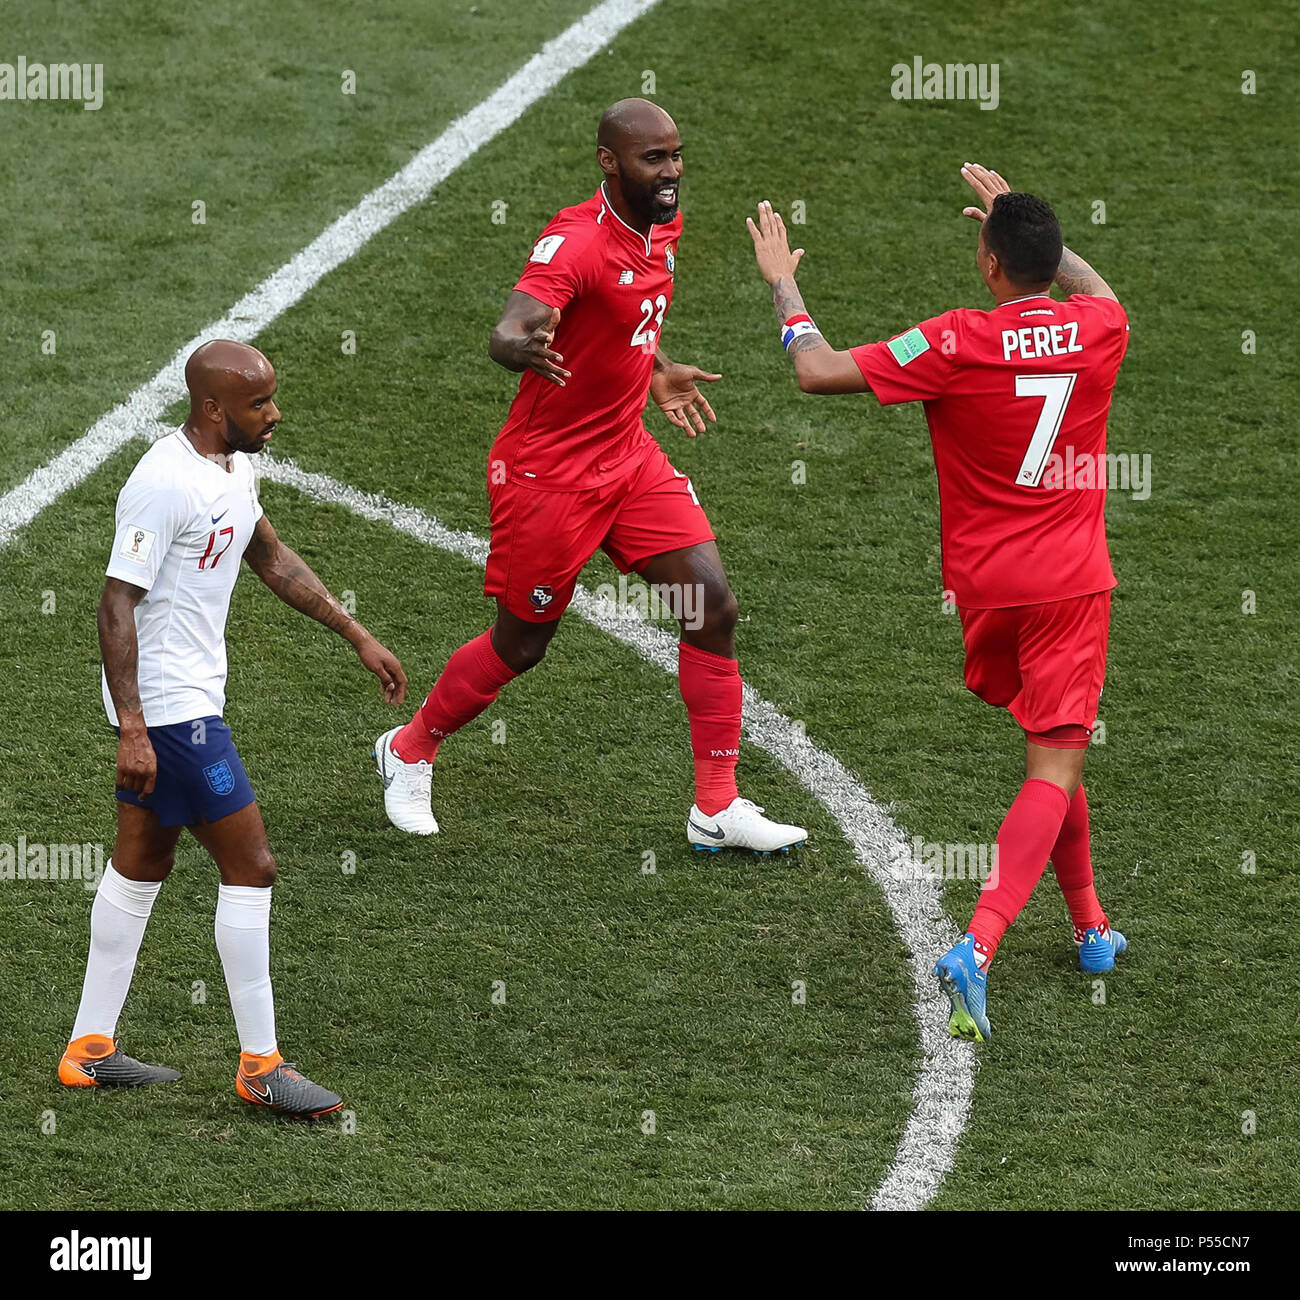 Felipe Baloy of Panama celebrates with Blas Perez of Panama after scoring his side's first goal to make the score 6-1 during the 2018 FIFA World Cup Group G match between England and Panama at Nizhny Novgorod Stadium on June 24th 2018 in Nizhny Novgorod, Russia. (Photo by Daniel Chesterton/phcimages.com) Stock Photo